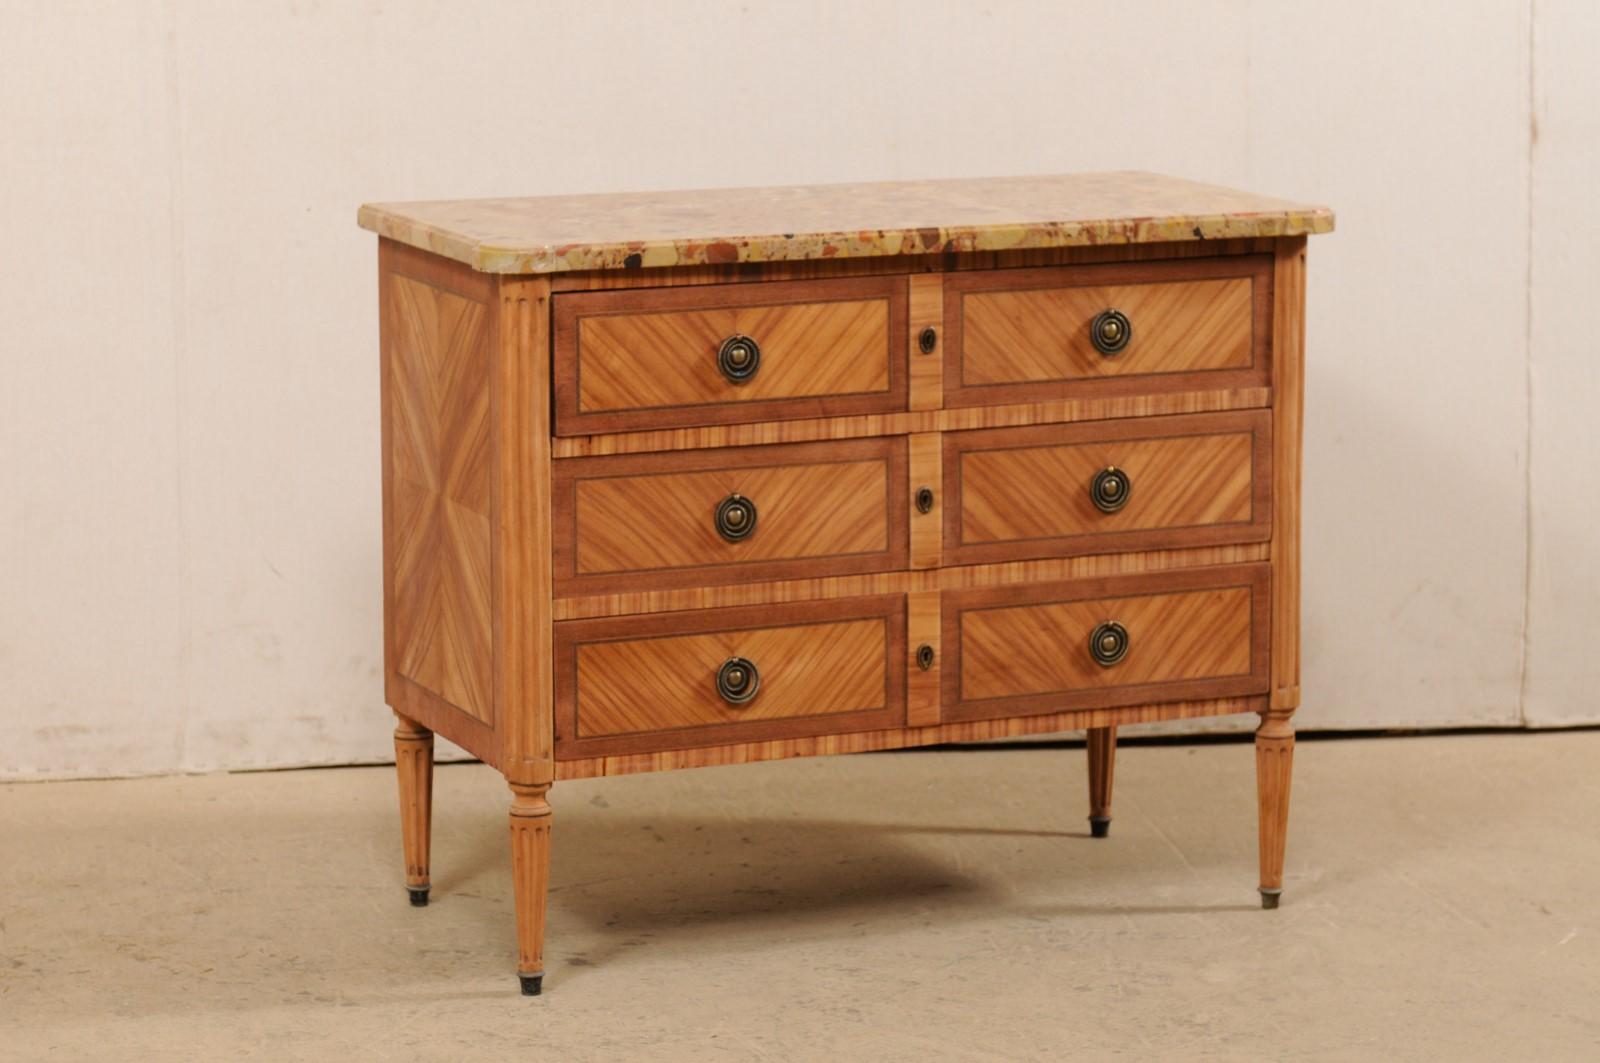 A French commode on legs with stone top from the early 20th century. This antique chest from France features a stone, likely scagliola, top with rounded, cove-edges at both front corners, atop a neoclassical-style case with rounded and flute-carved